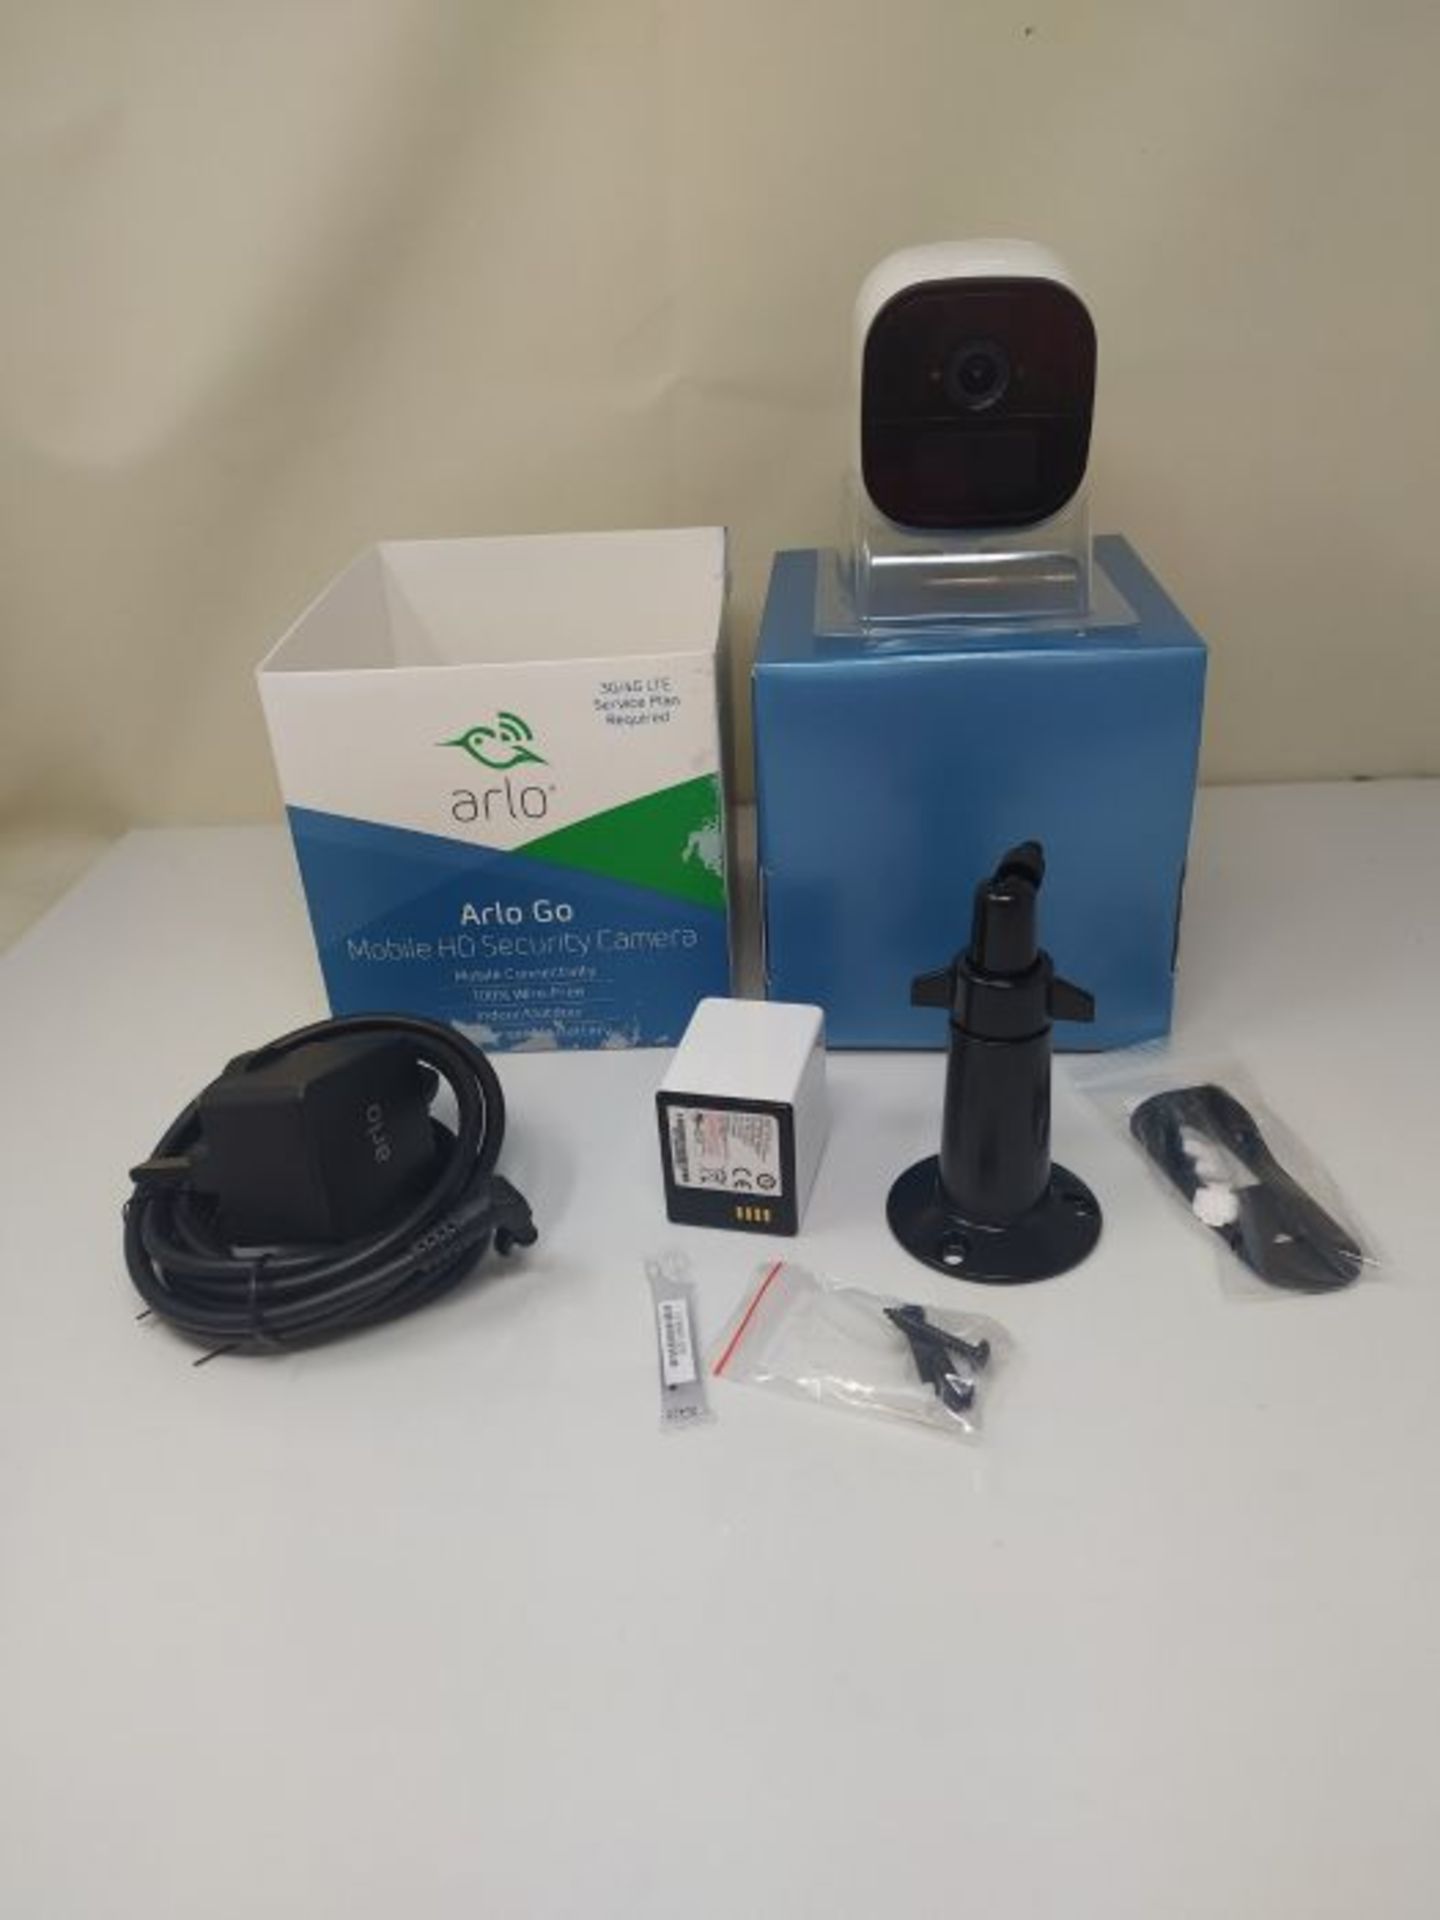 RRP £263.00 Arlo Go Mobile HD Smart Home Security Camera CCTV, LTE Connectivity, Night Vision, Loc - Image 2 of 2